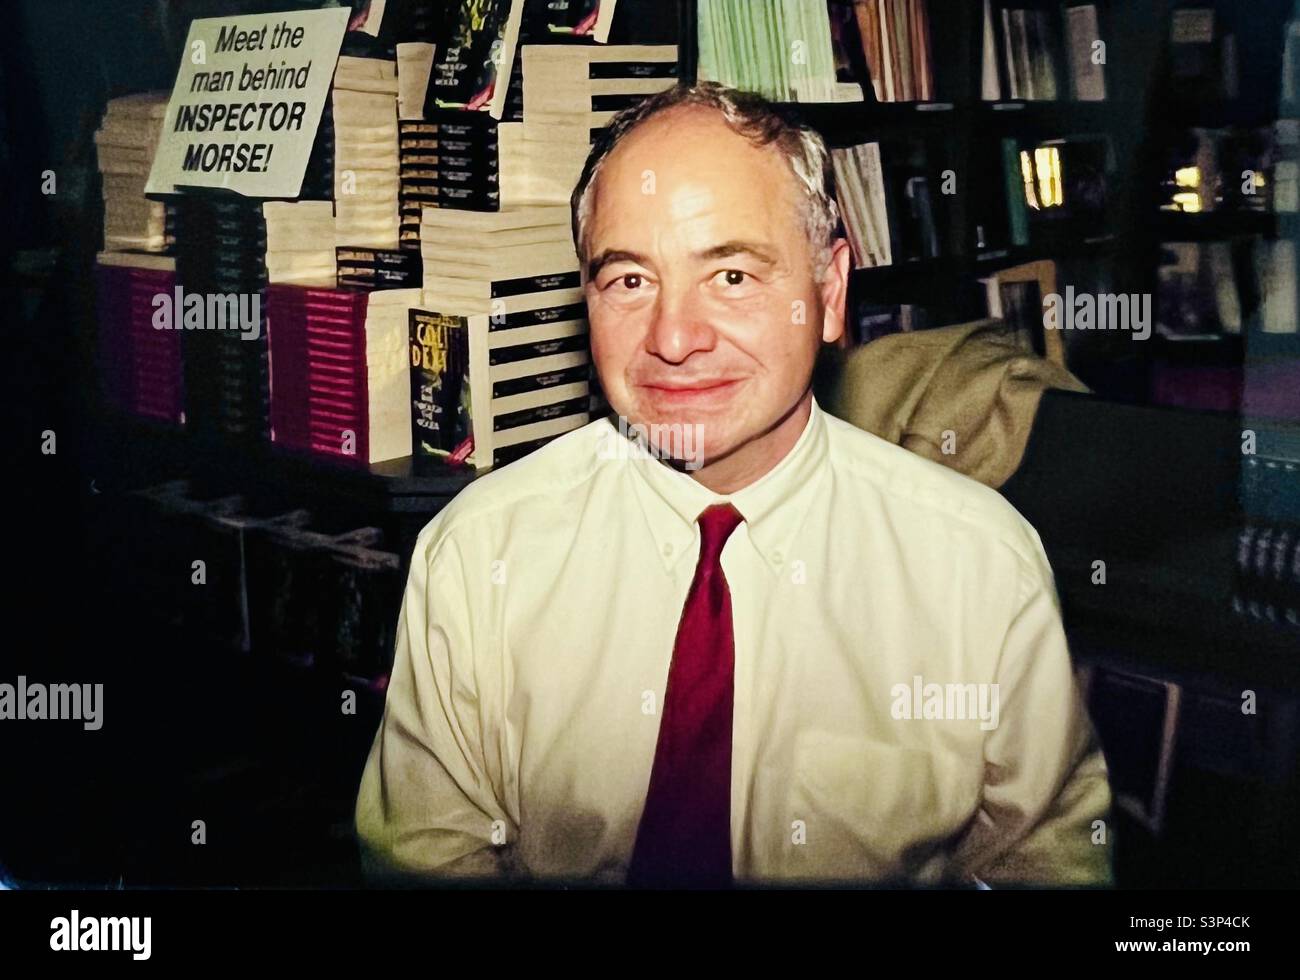 The late Colin Dexter author of Inspector Morse mystery books Stock Photo